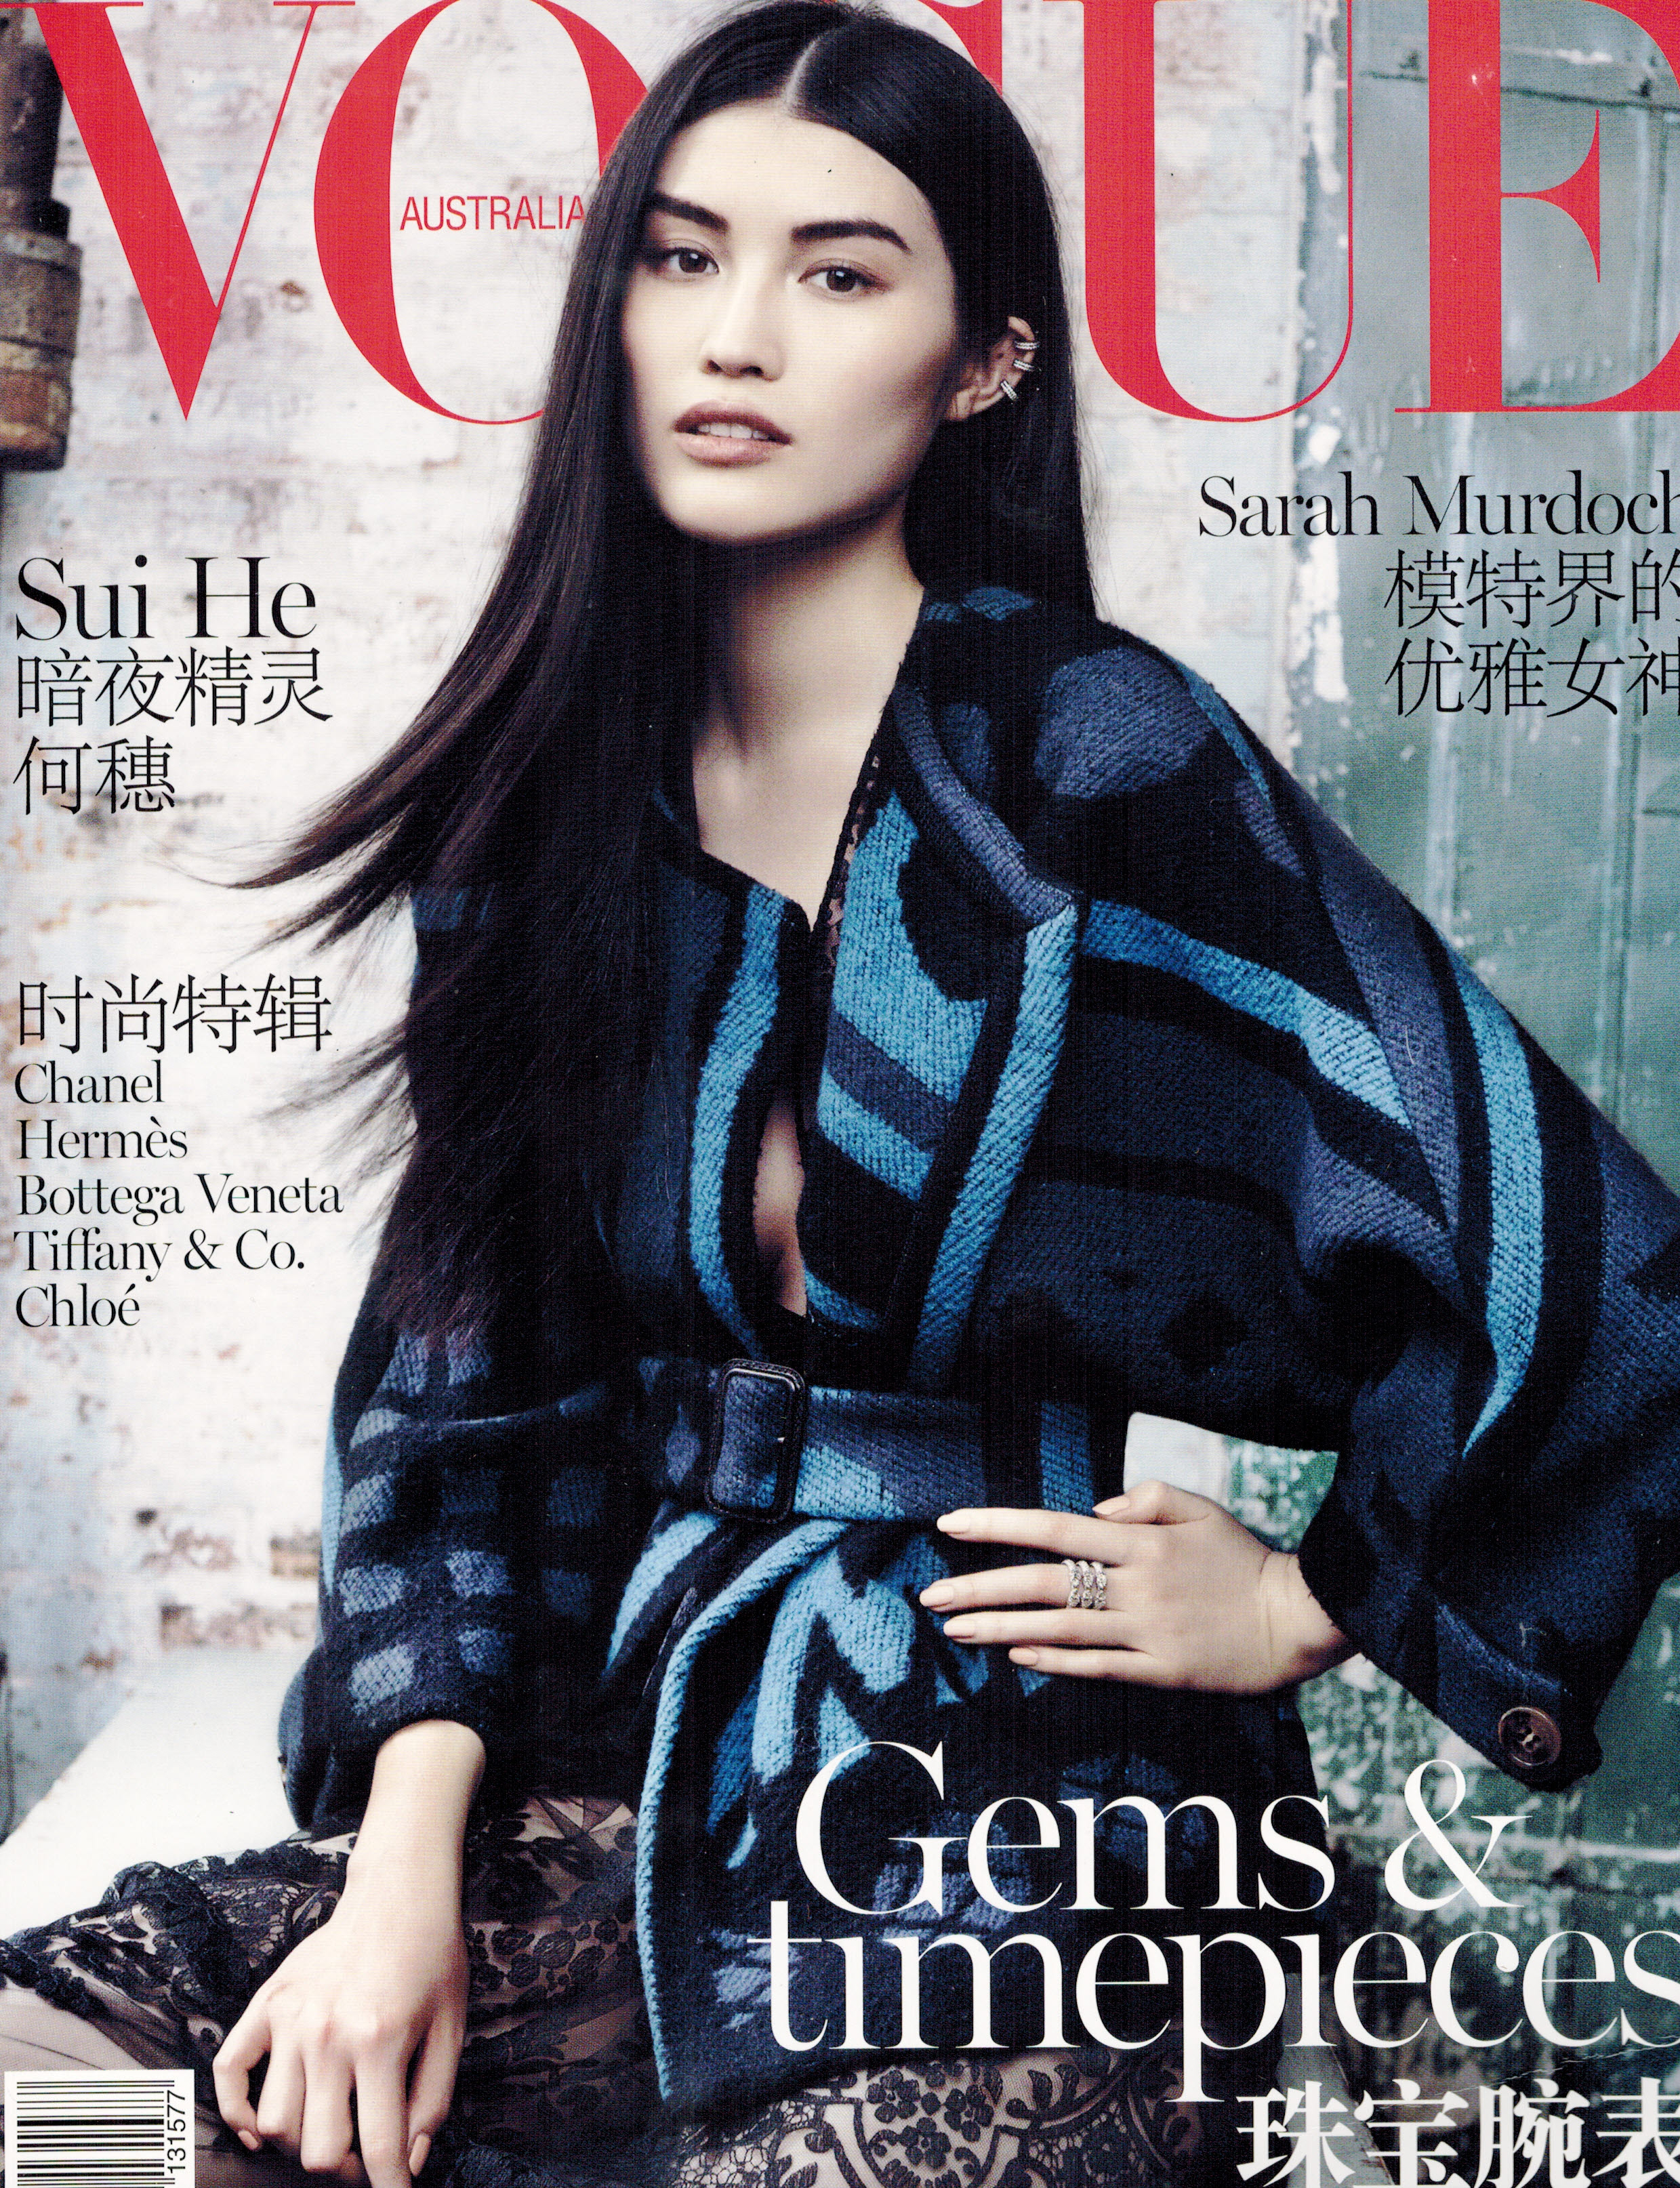 sui he on vogue australia cover photo shoot by benny horne and county fair productions 